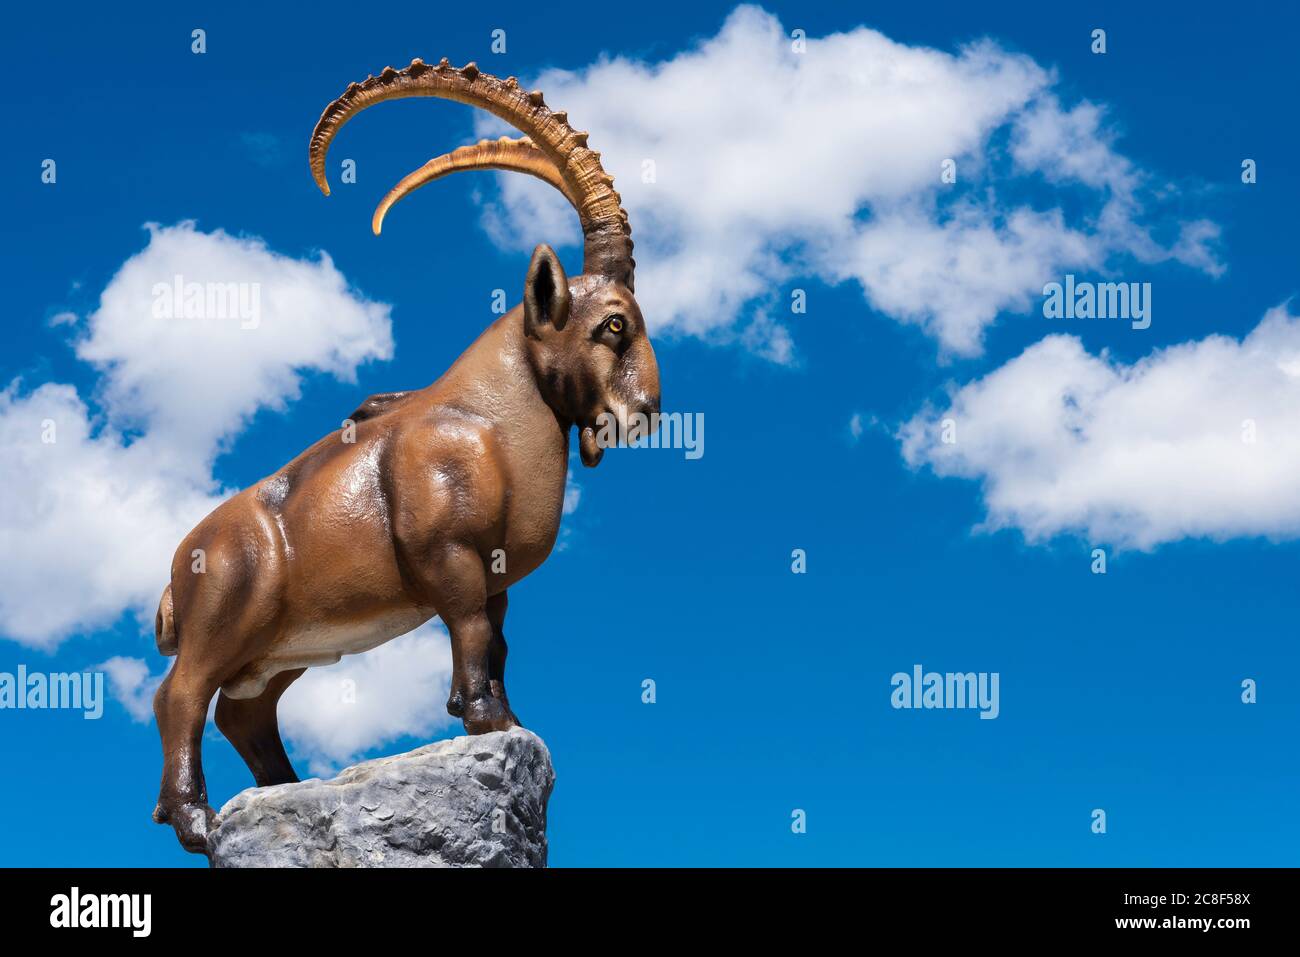 MAYRHOFEN, AUSTRIA - Jun 22, 2019: Sculpture of a mountain goat on a blue sky with white clouds.  The mountain goat is depicted on the Ahorn mountain. Stock Photo